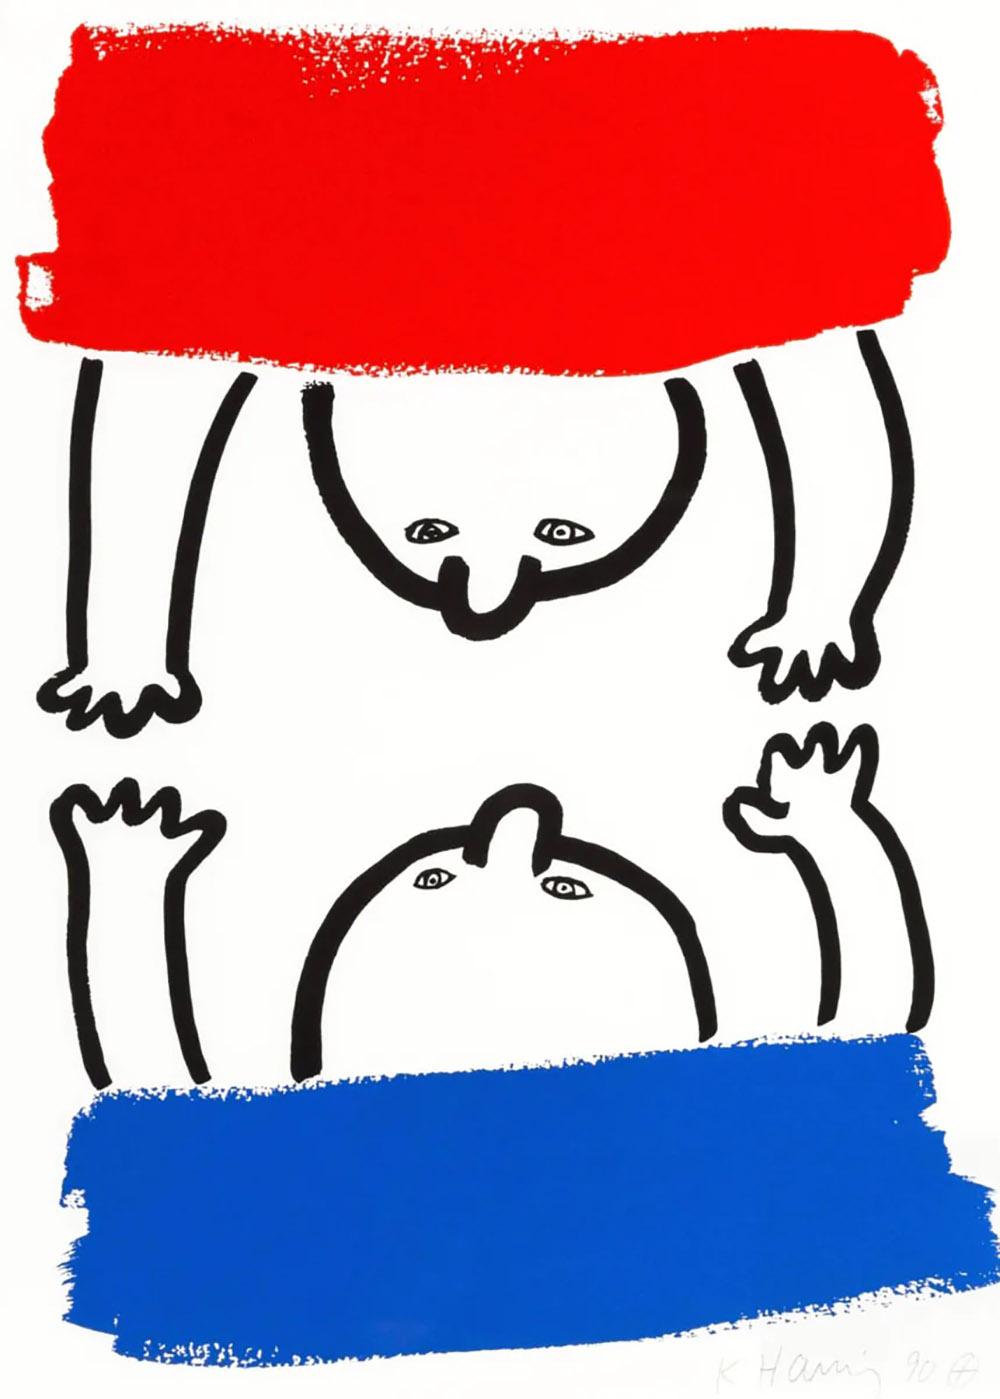 Keith Haring Interior Print - KEITH HARING 'THE STORY OF RED AND BLUE - XVI', 1989, SIGNED & NUMBERED